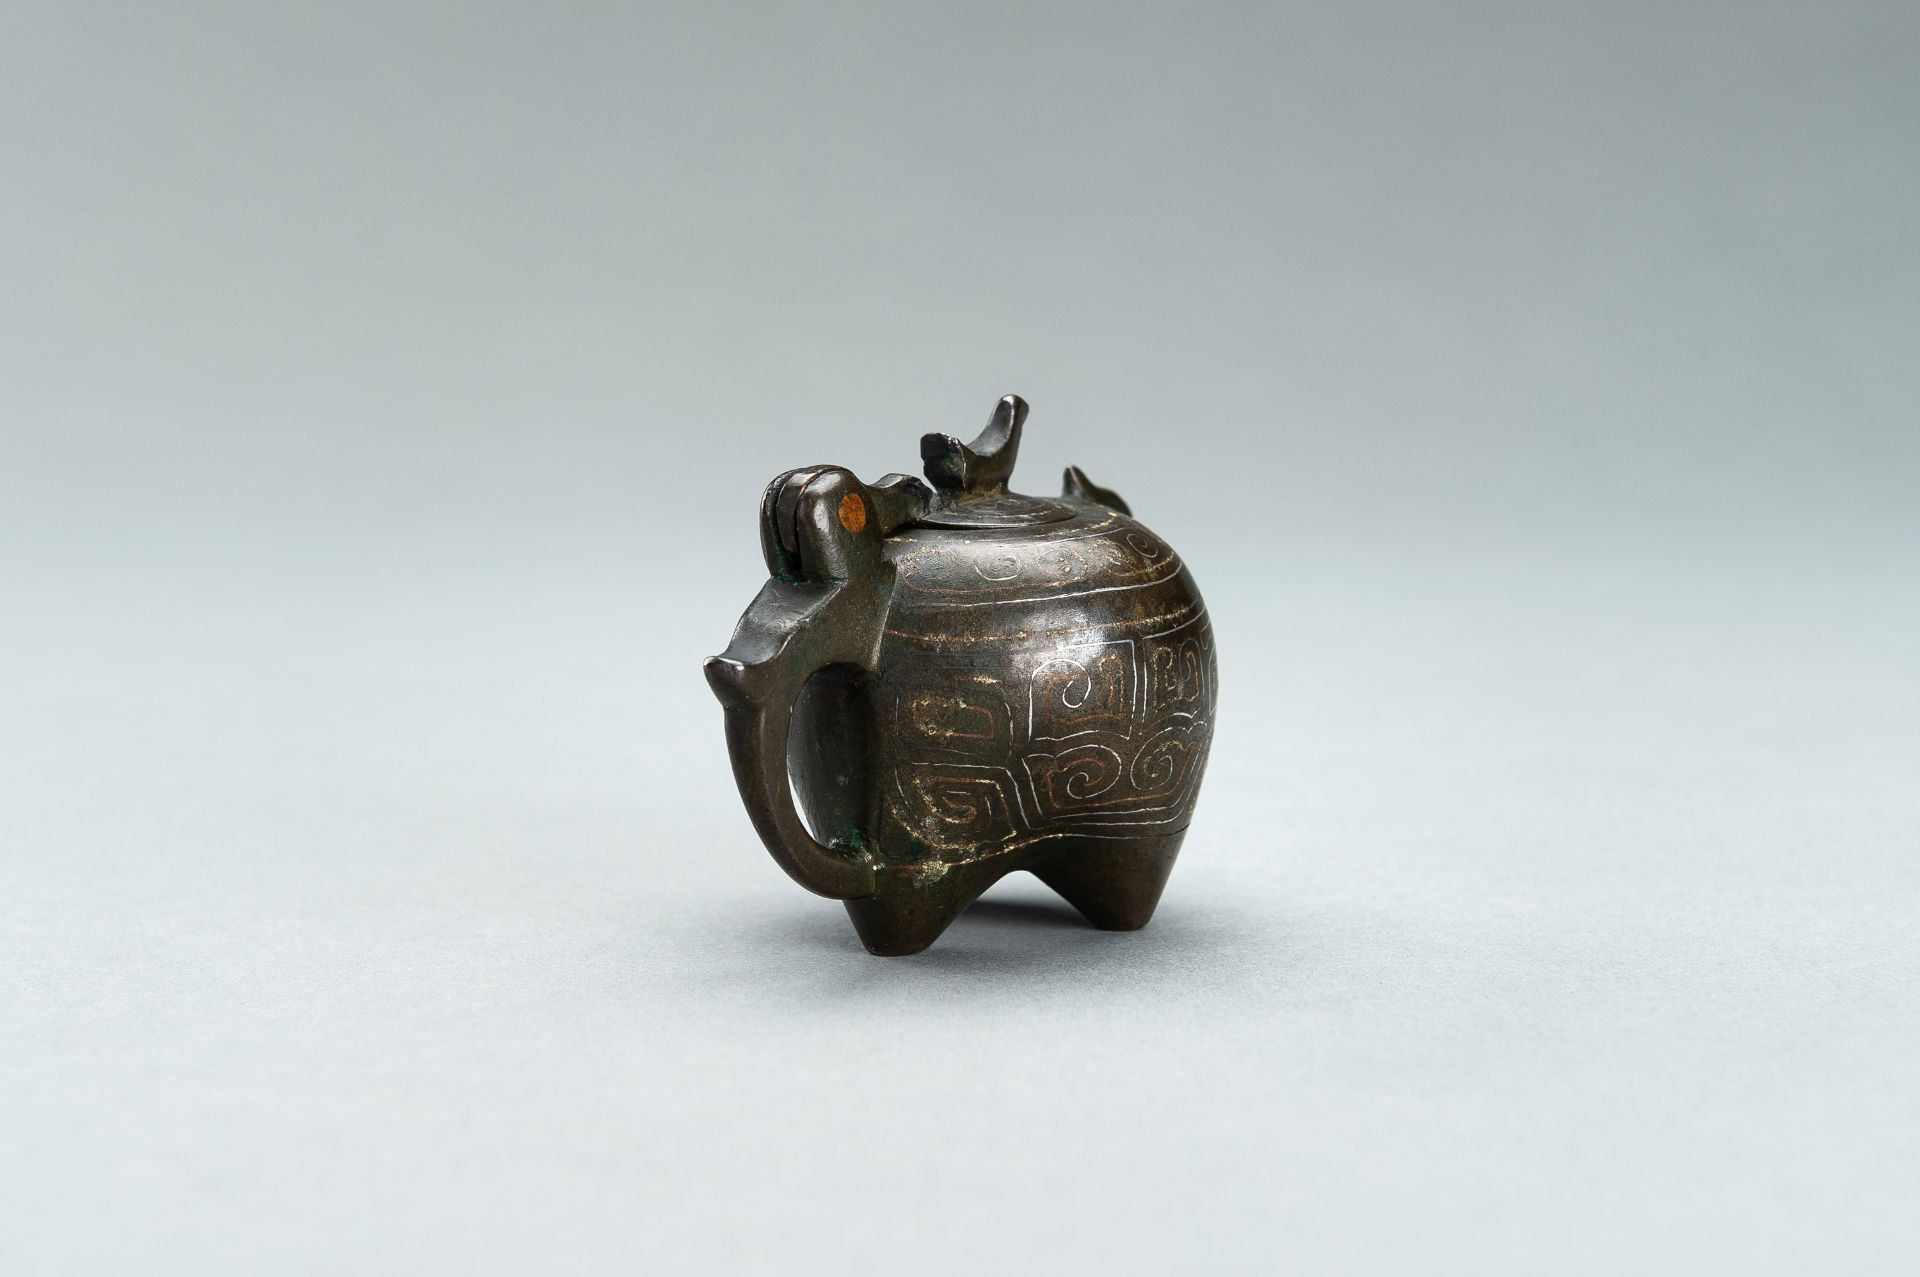 A SMALL COPPER AND SILVER INLAID BRONZE POURING TRIPOD VESSEL IN THE FORM OF AN ANIMAL, 17TH CENTURY - Image 3 of 11